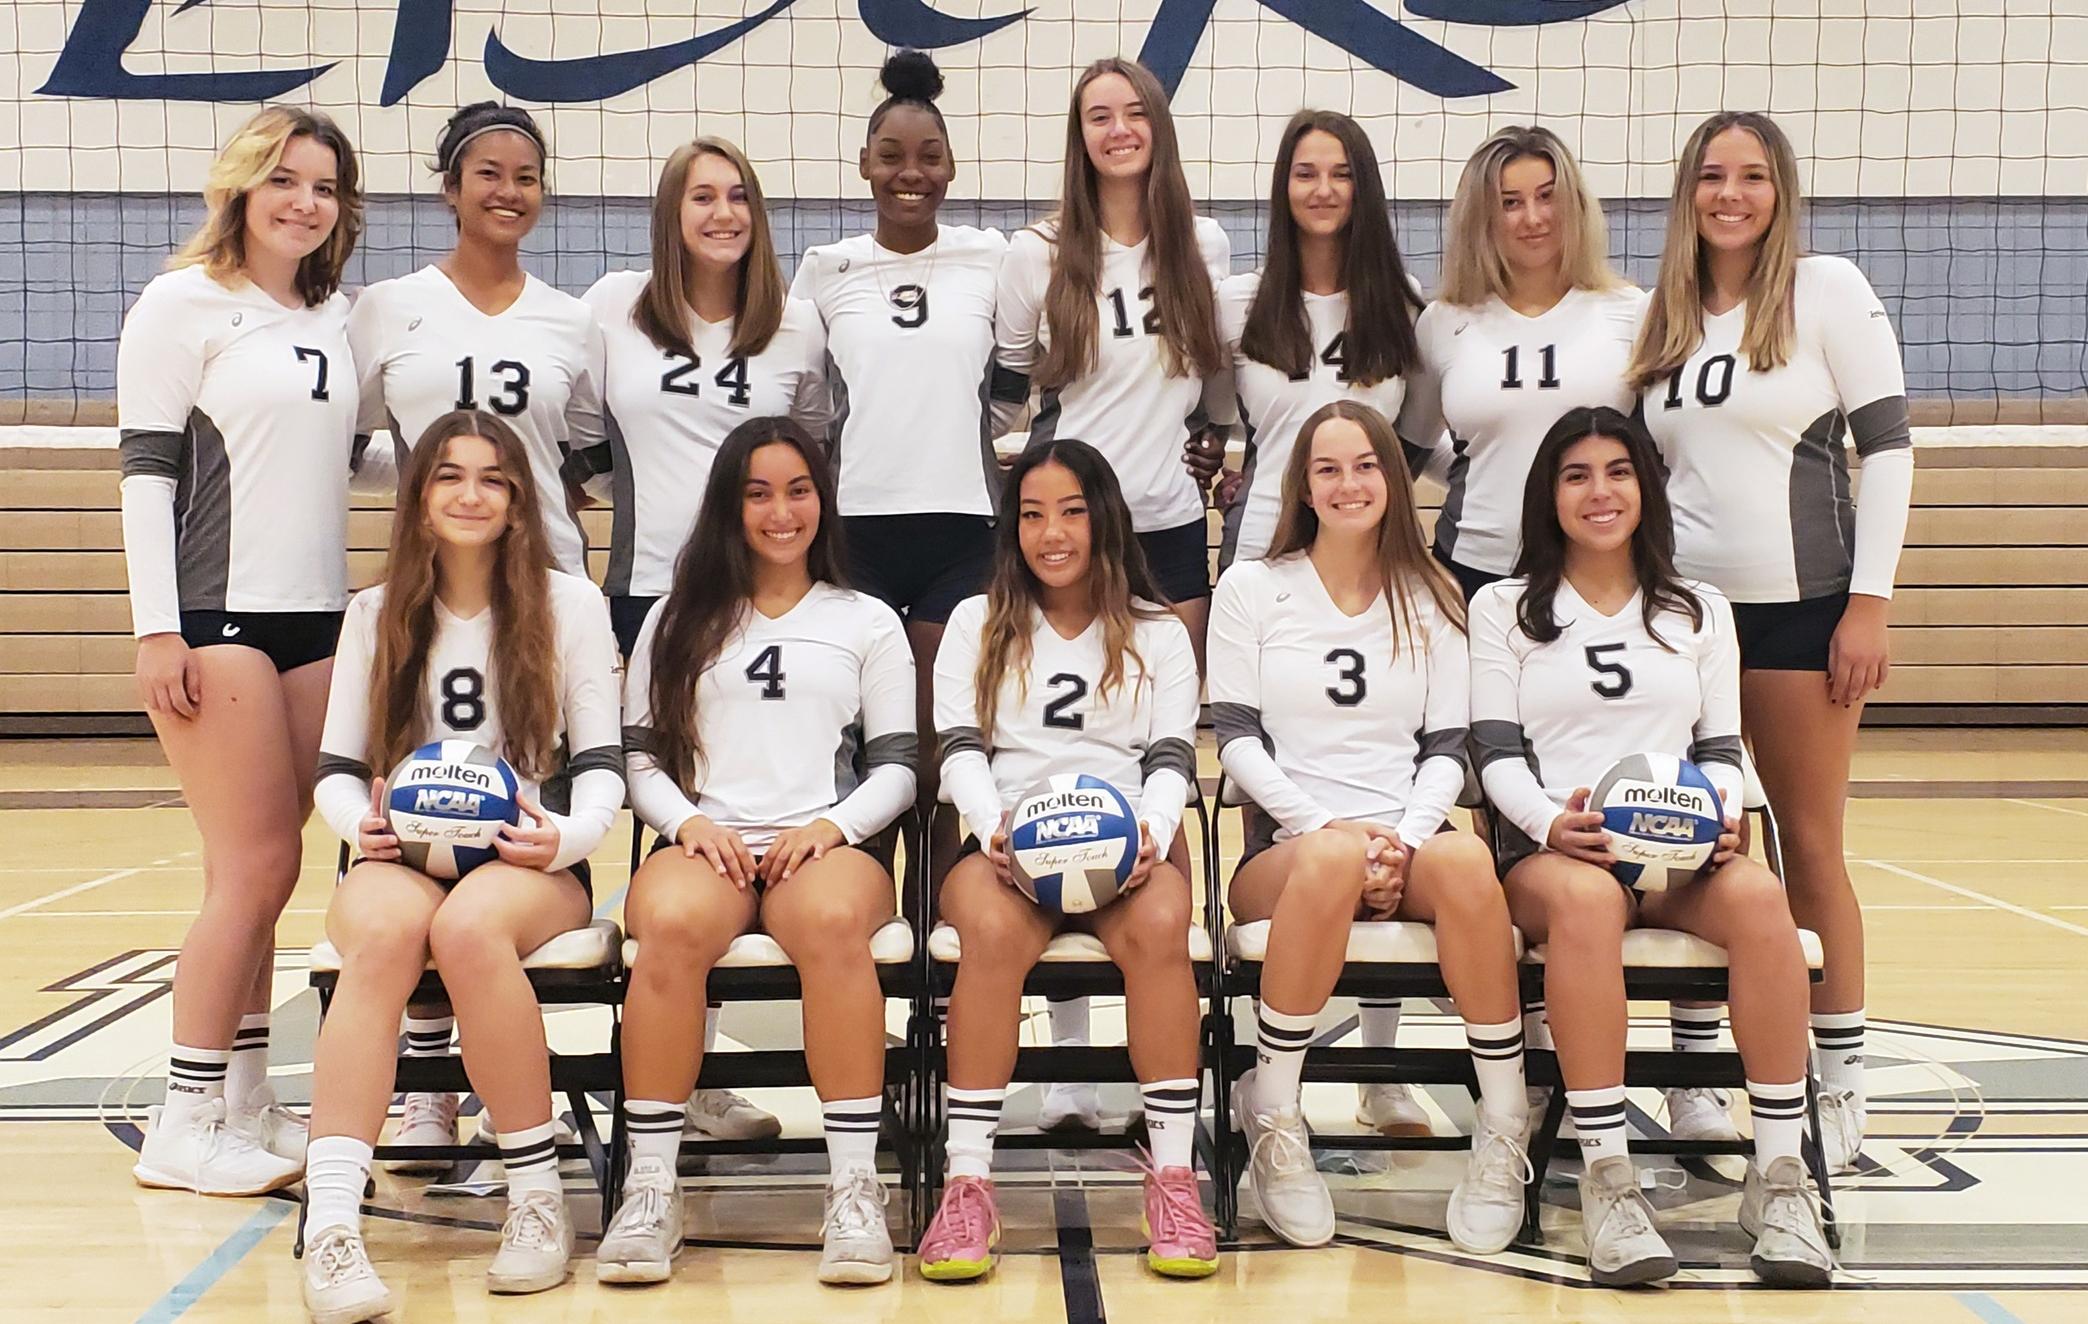 Women's volleyball team is ready for the 2021 season